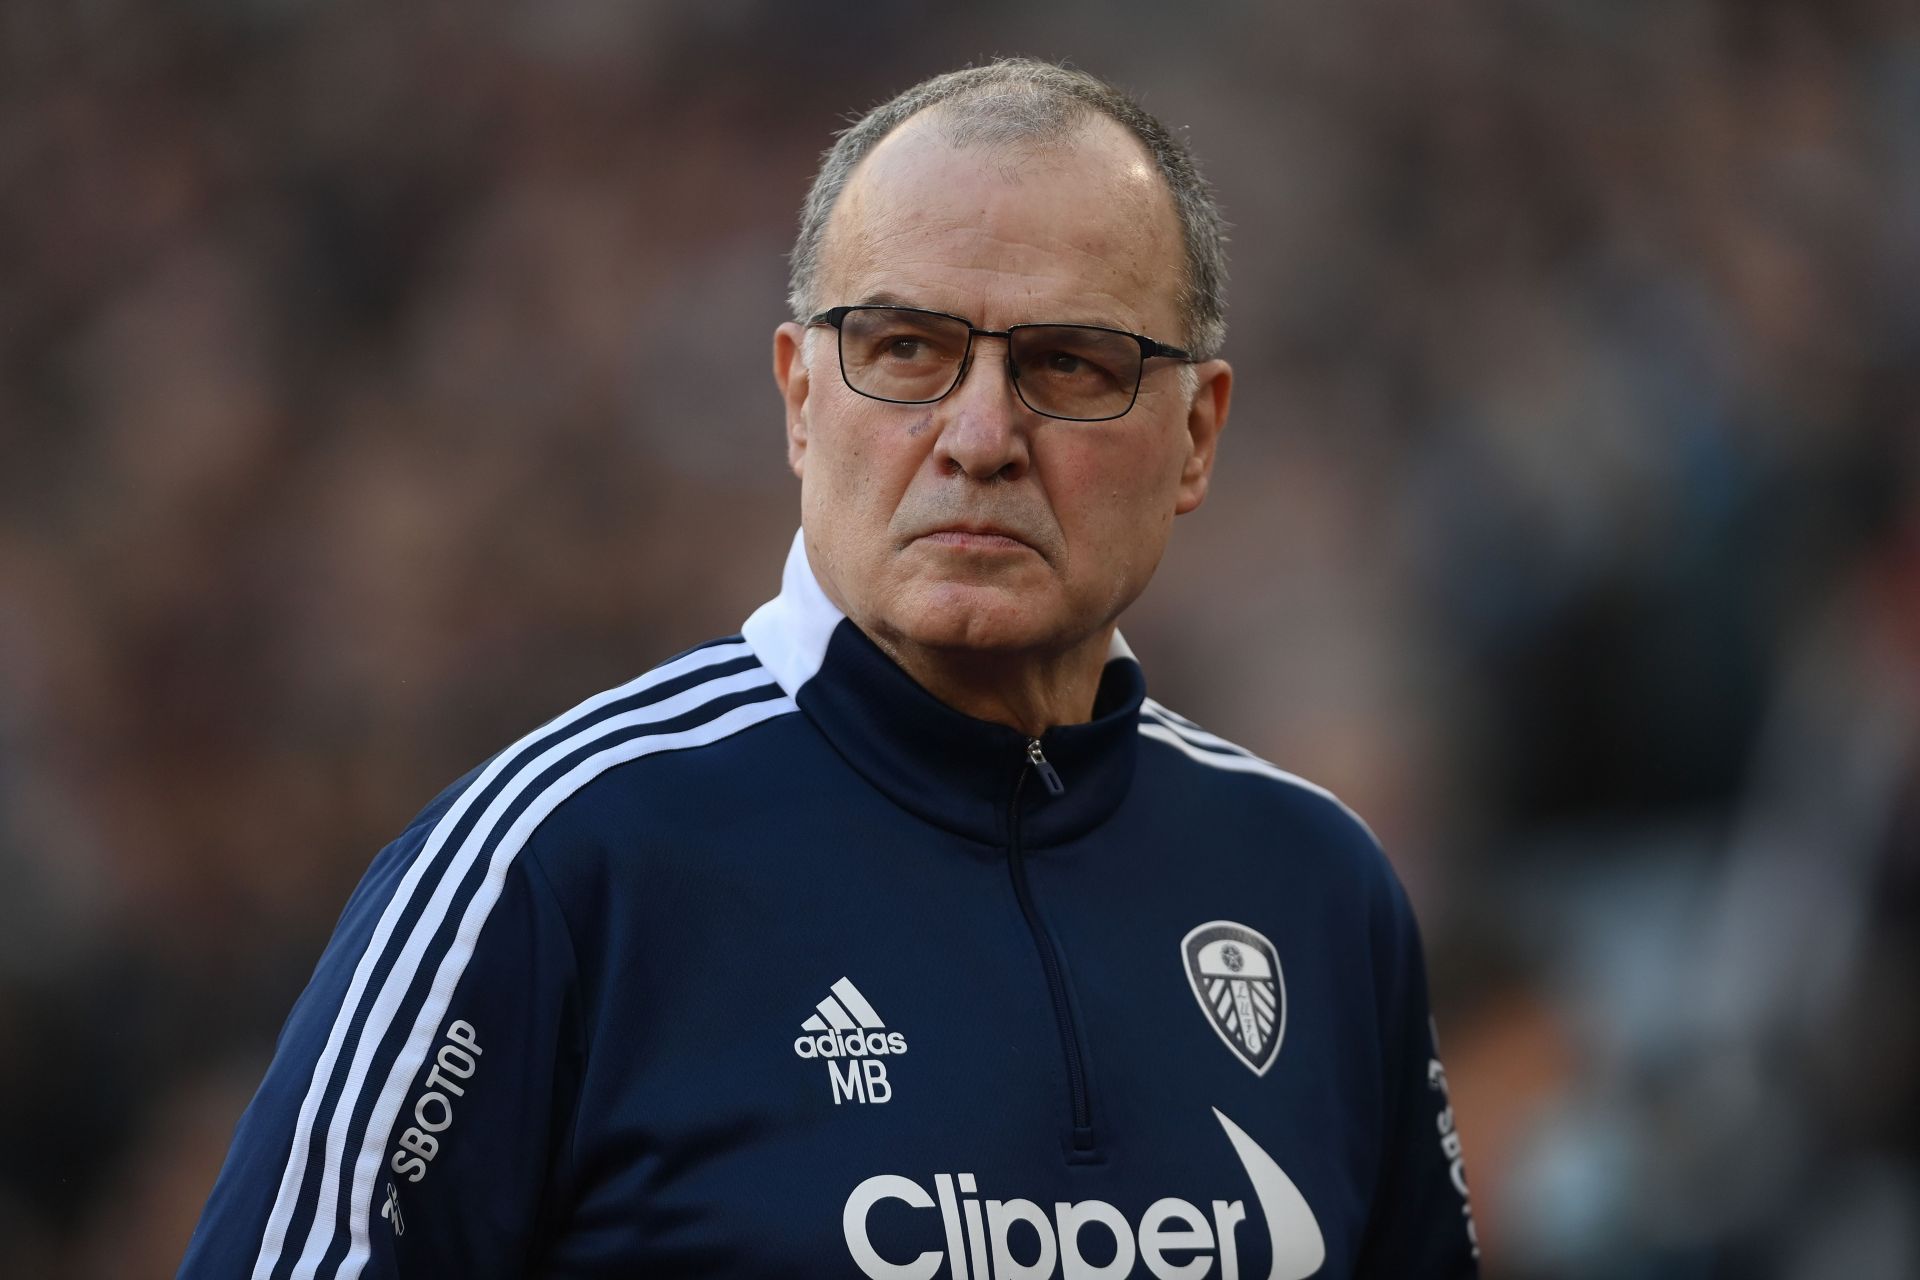 Marcelo Bielsa did an incredible job at Leeds United before being shown the door midway through last season.